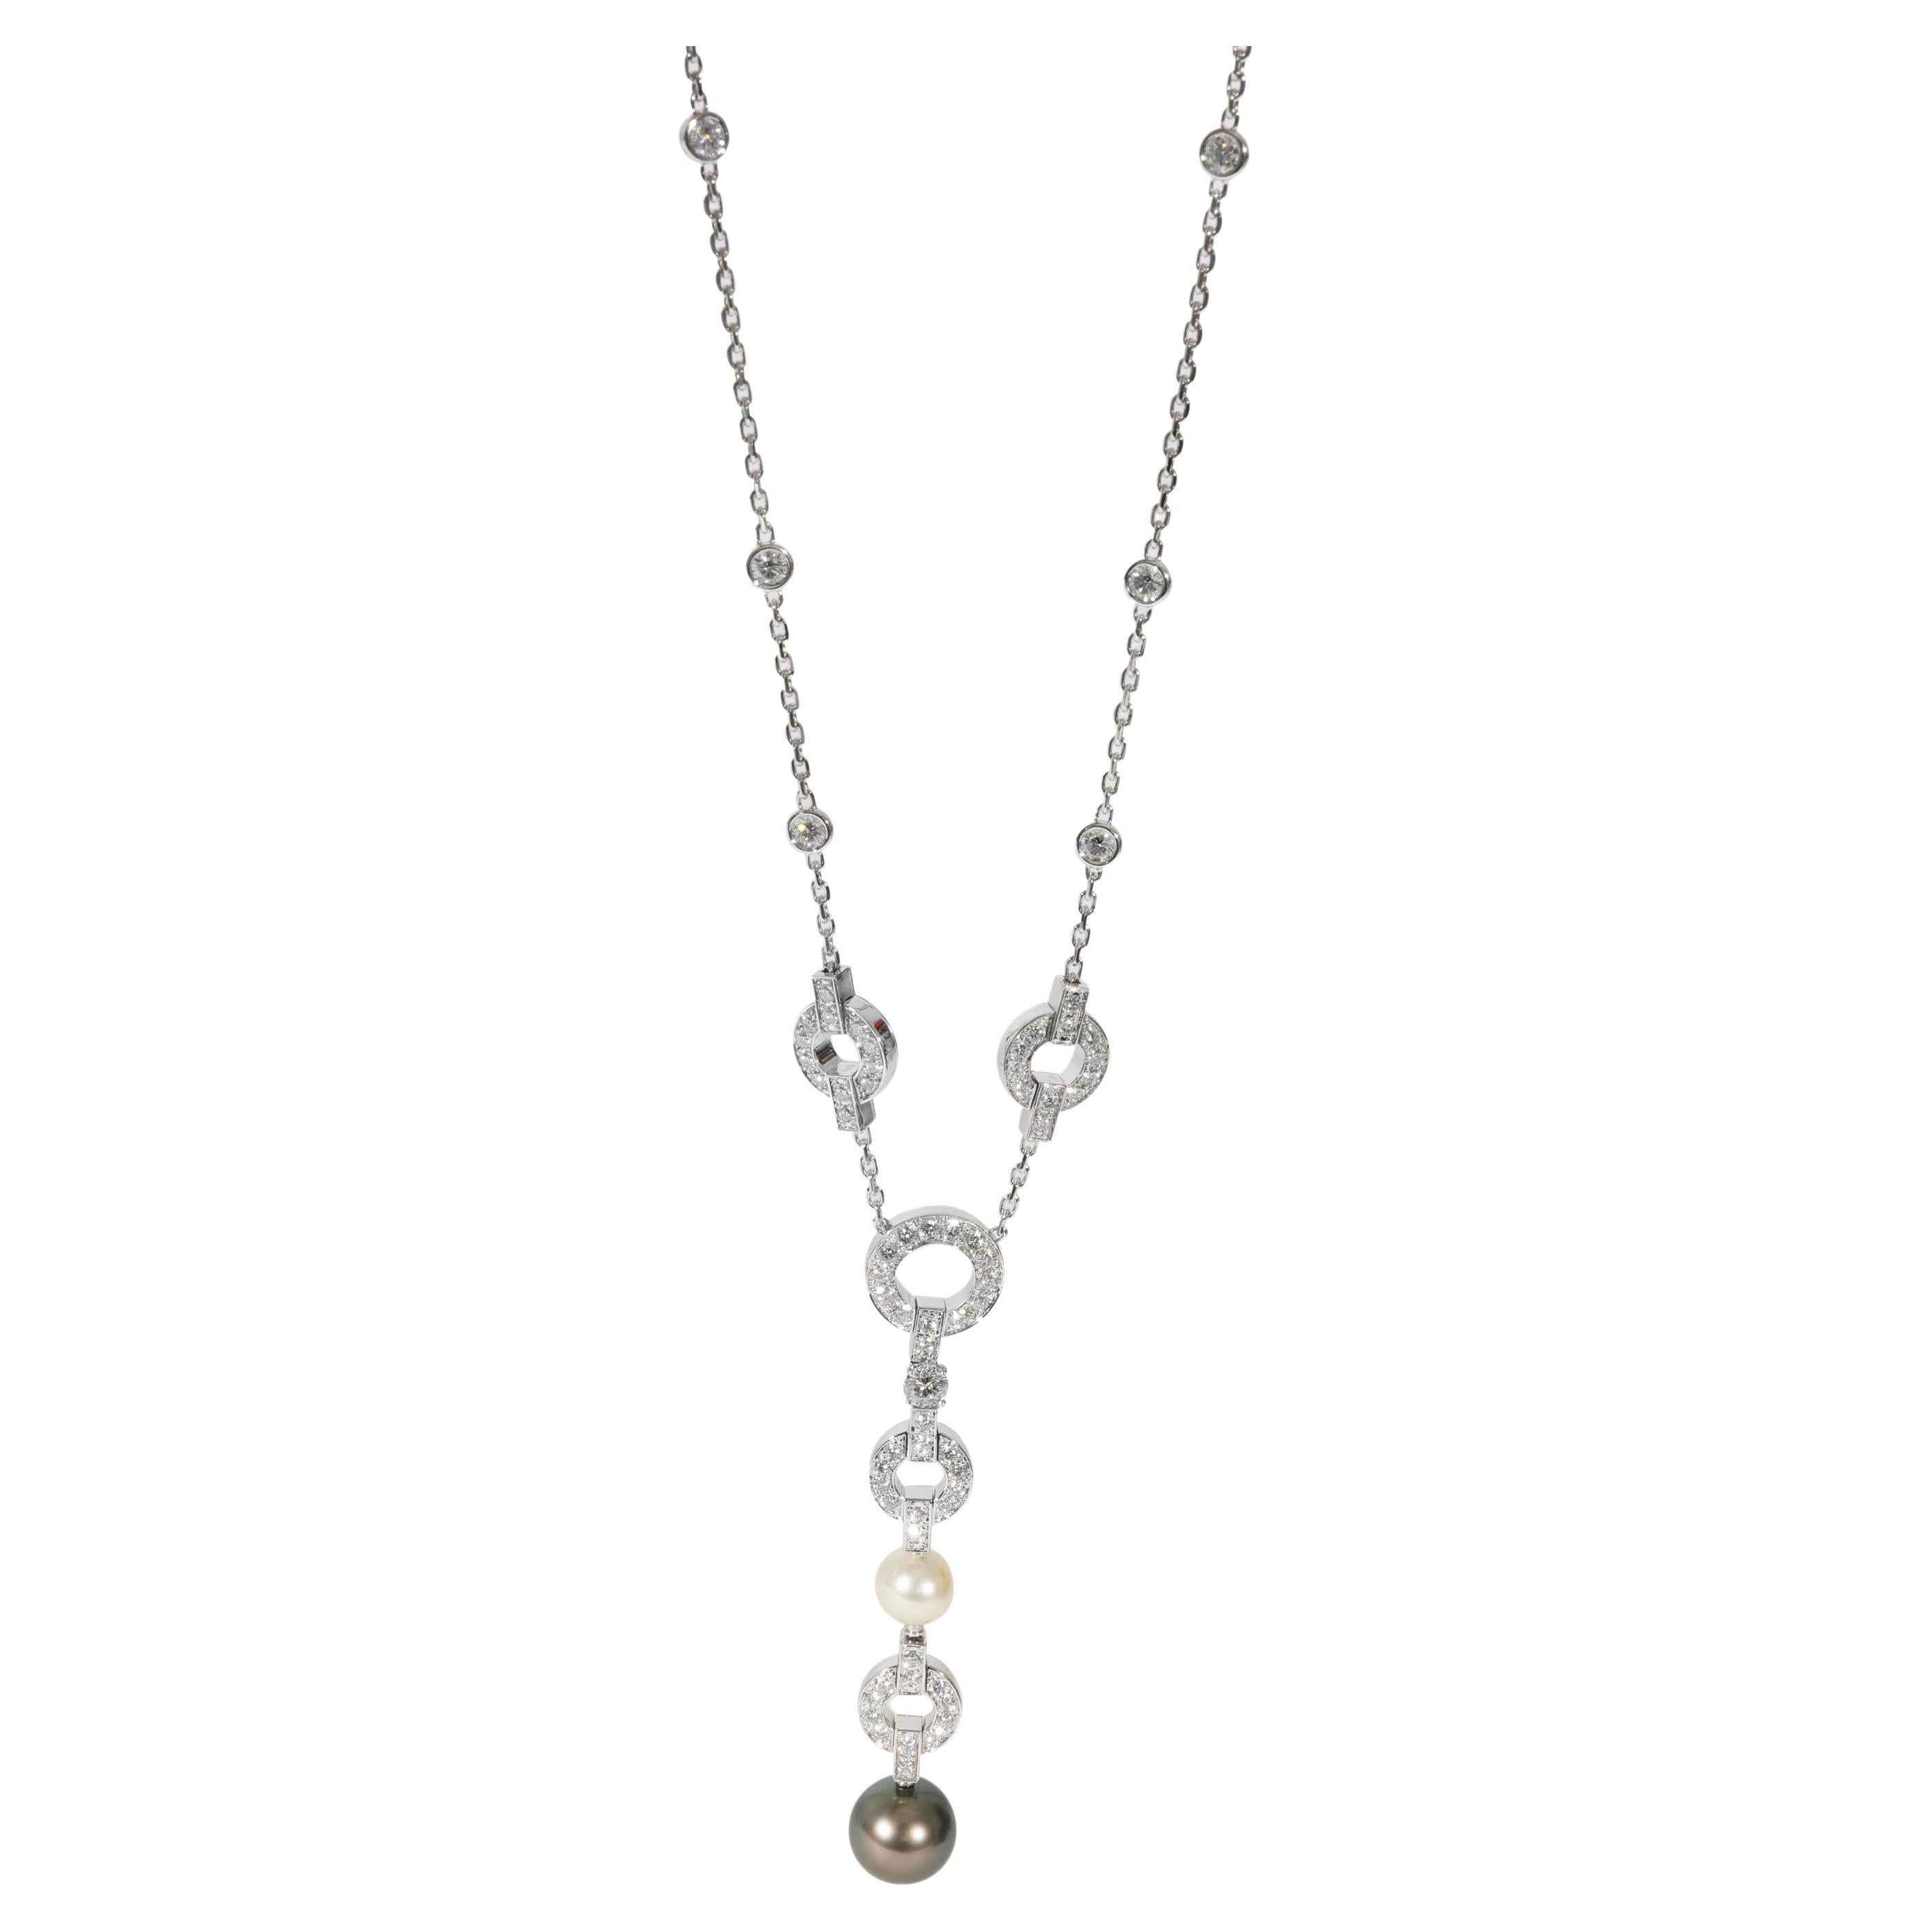 Cartier Himalia Pearl Diamond Necklace in 18k White Gold 2.5 CTW For Sale